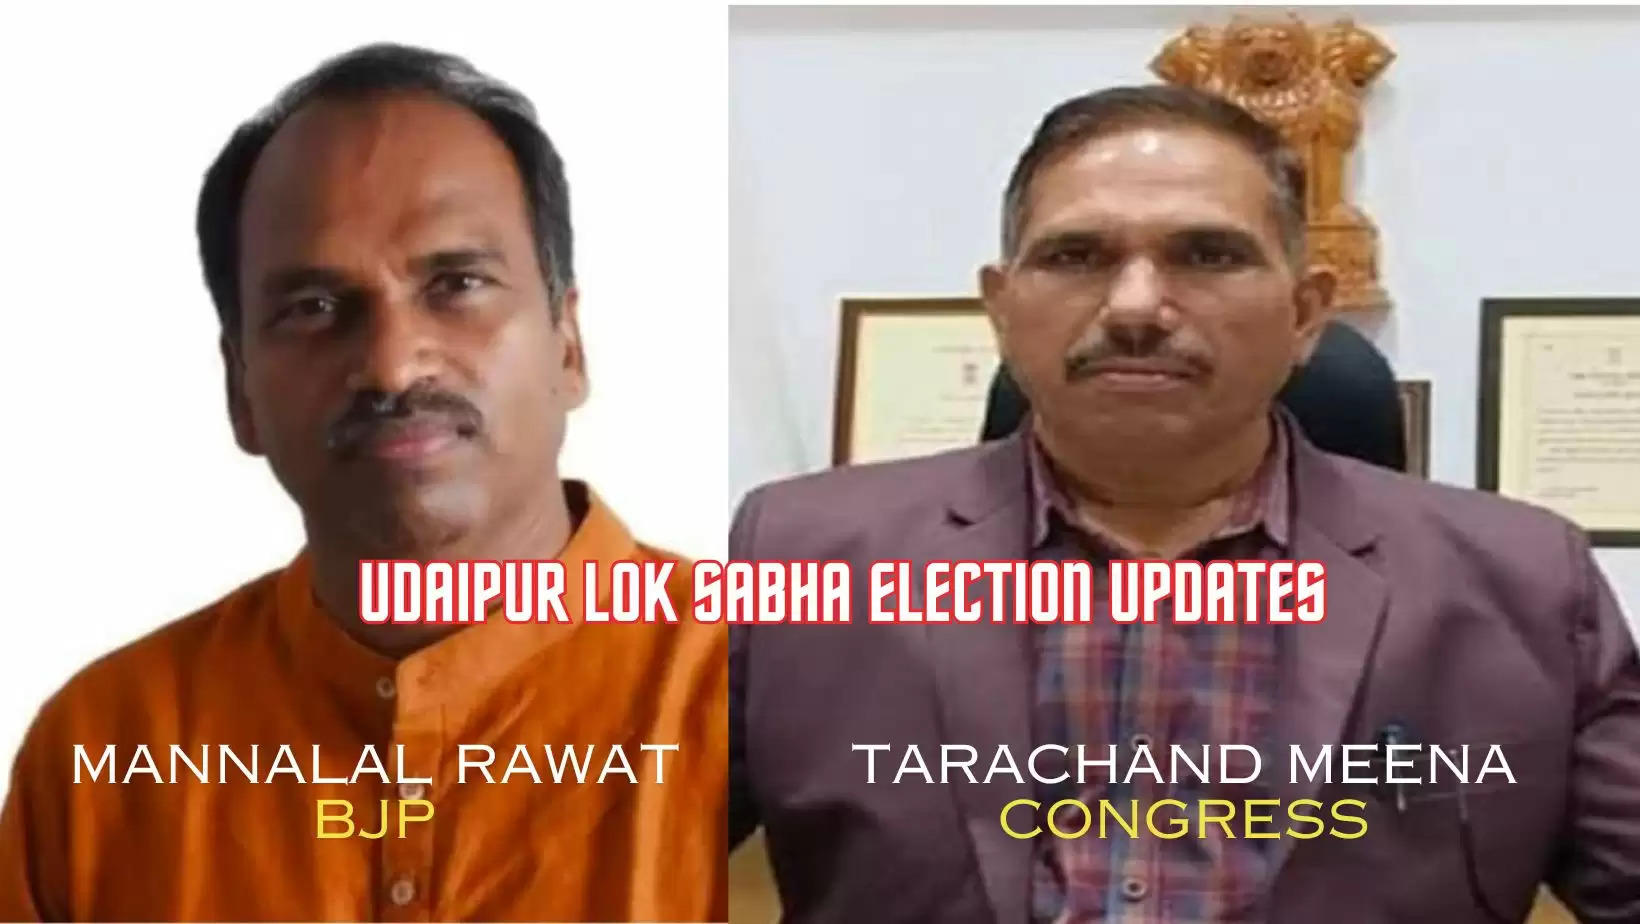 Tarachand Meena will be congress candidate from udaipur and mannalal rawat will be bjp candidate from udaipur